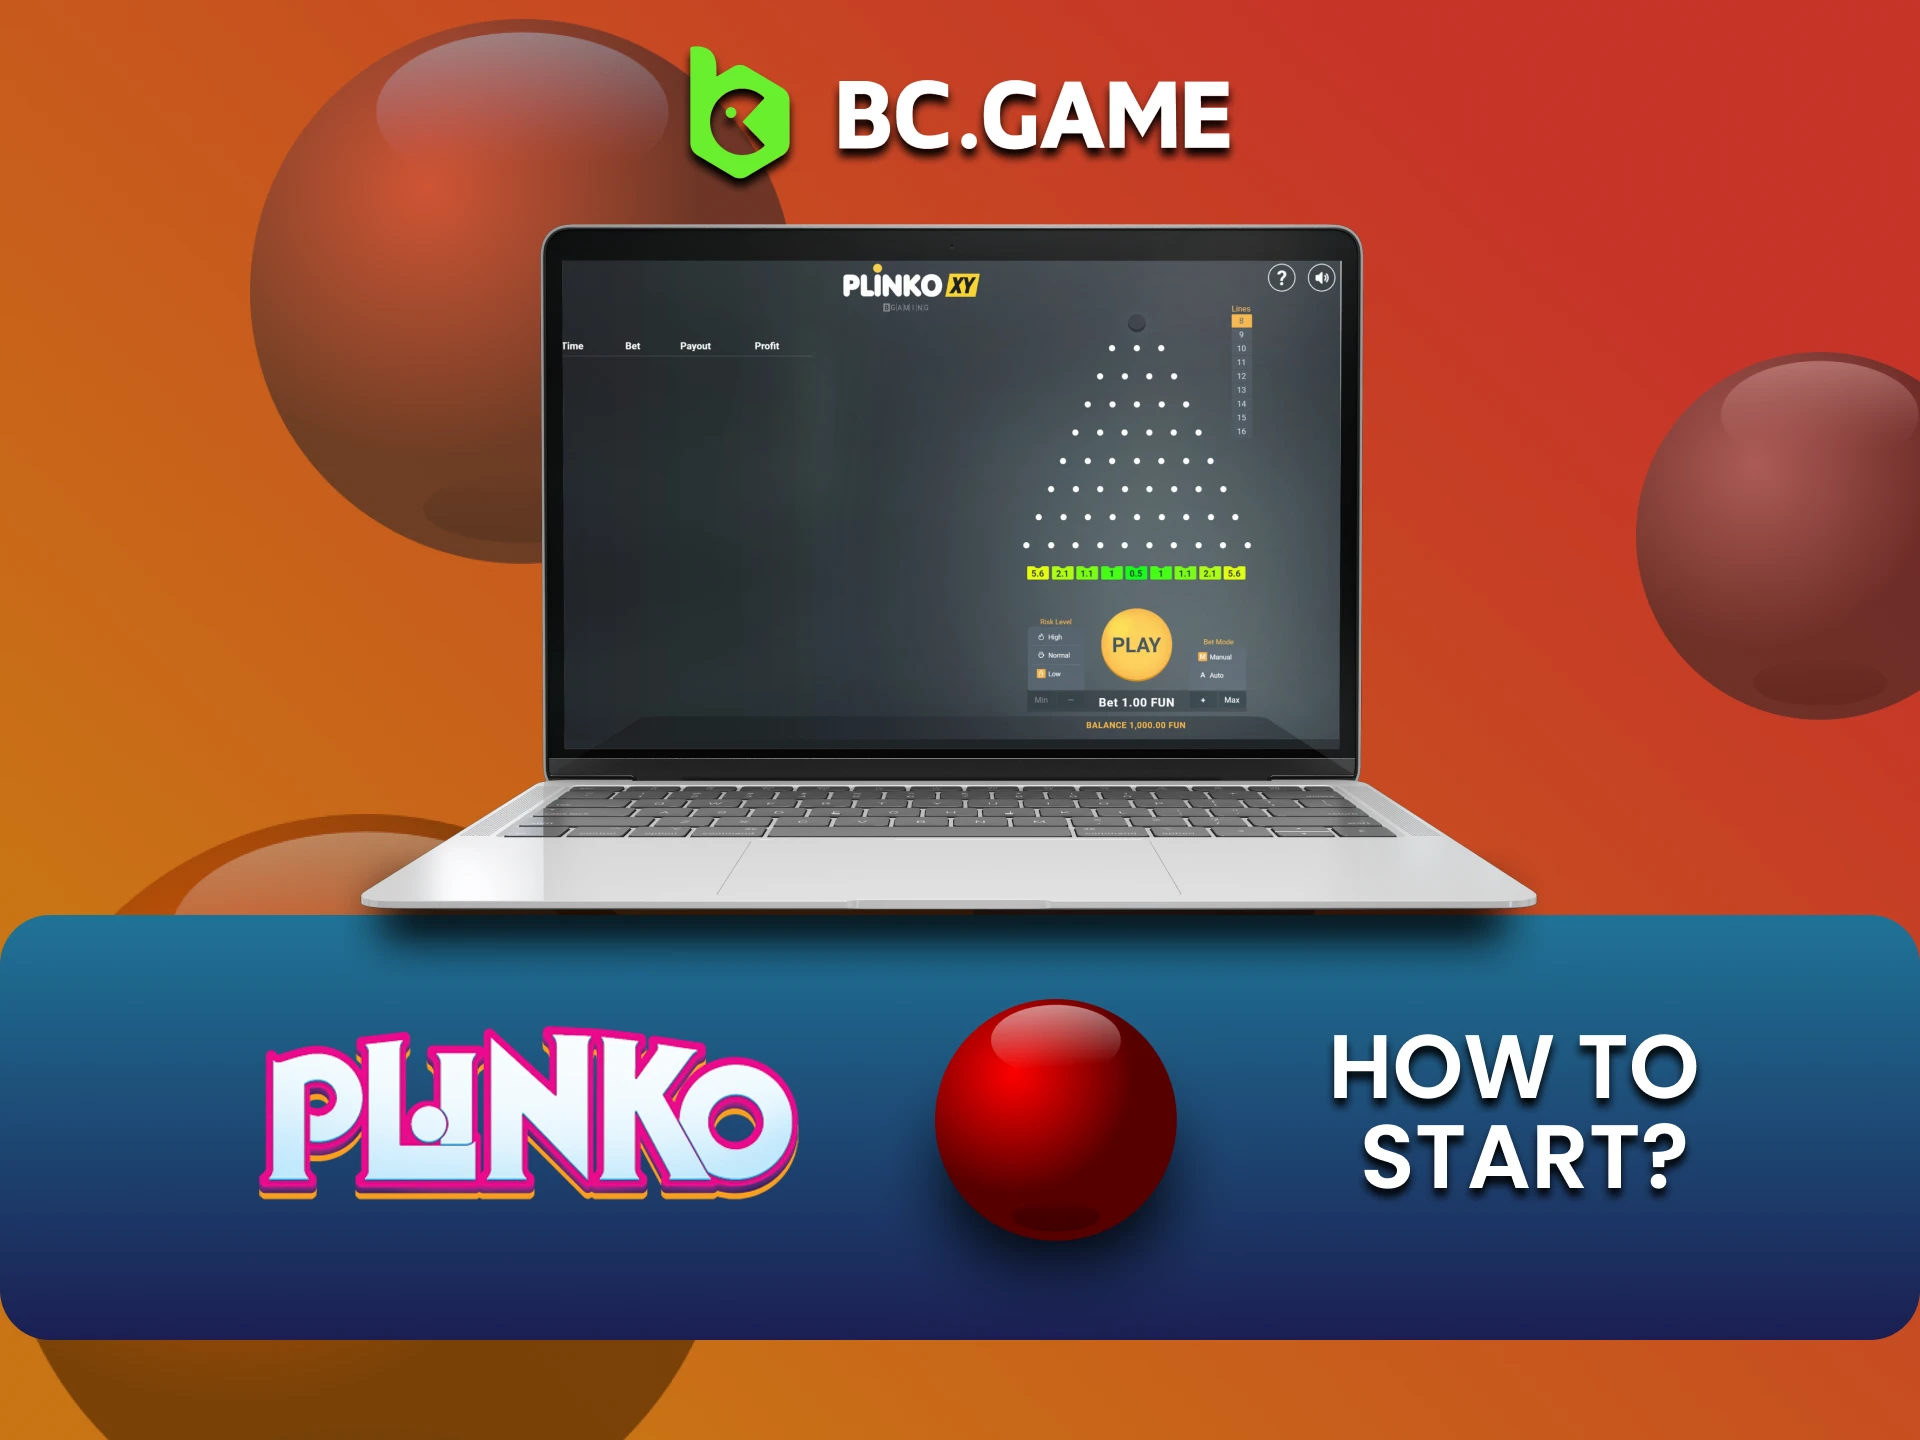 We will tell you how to start playing Plinko on the BCGame website.